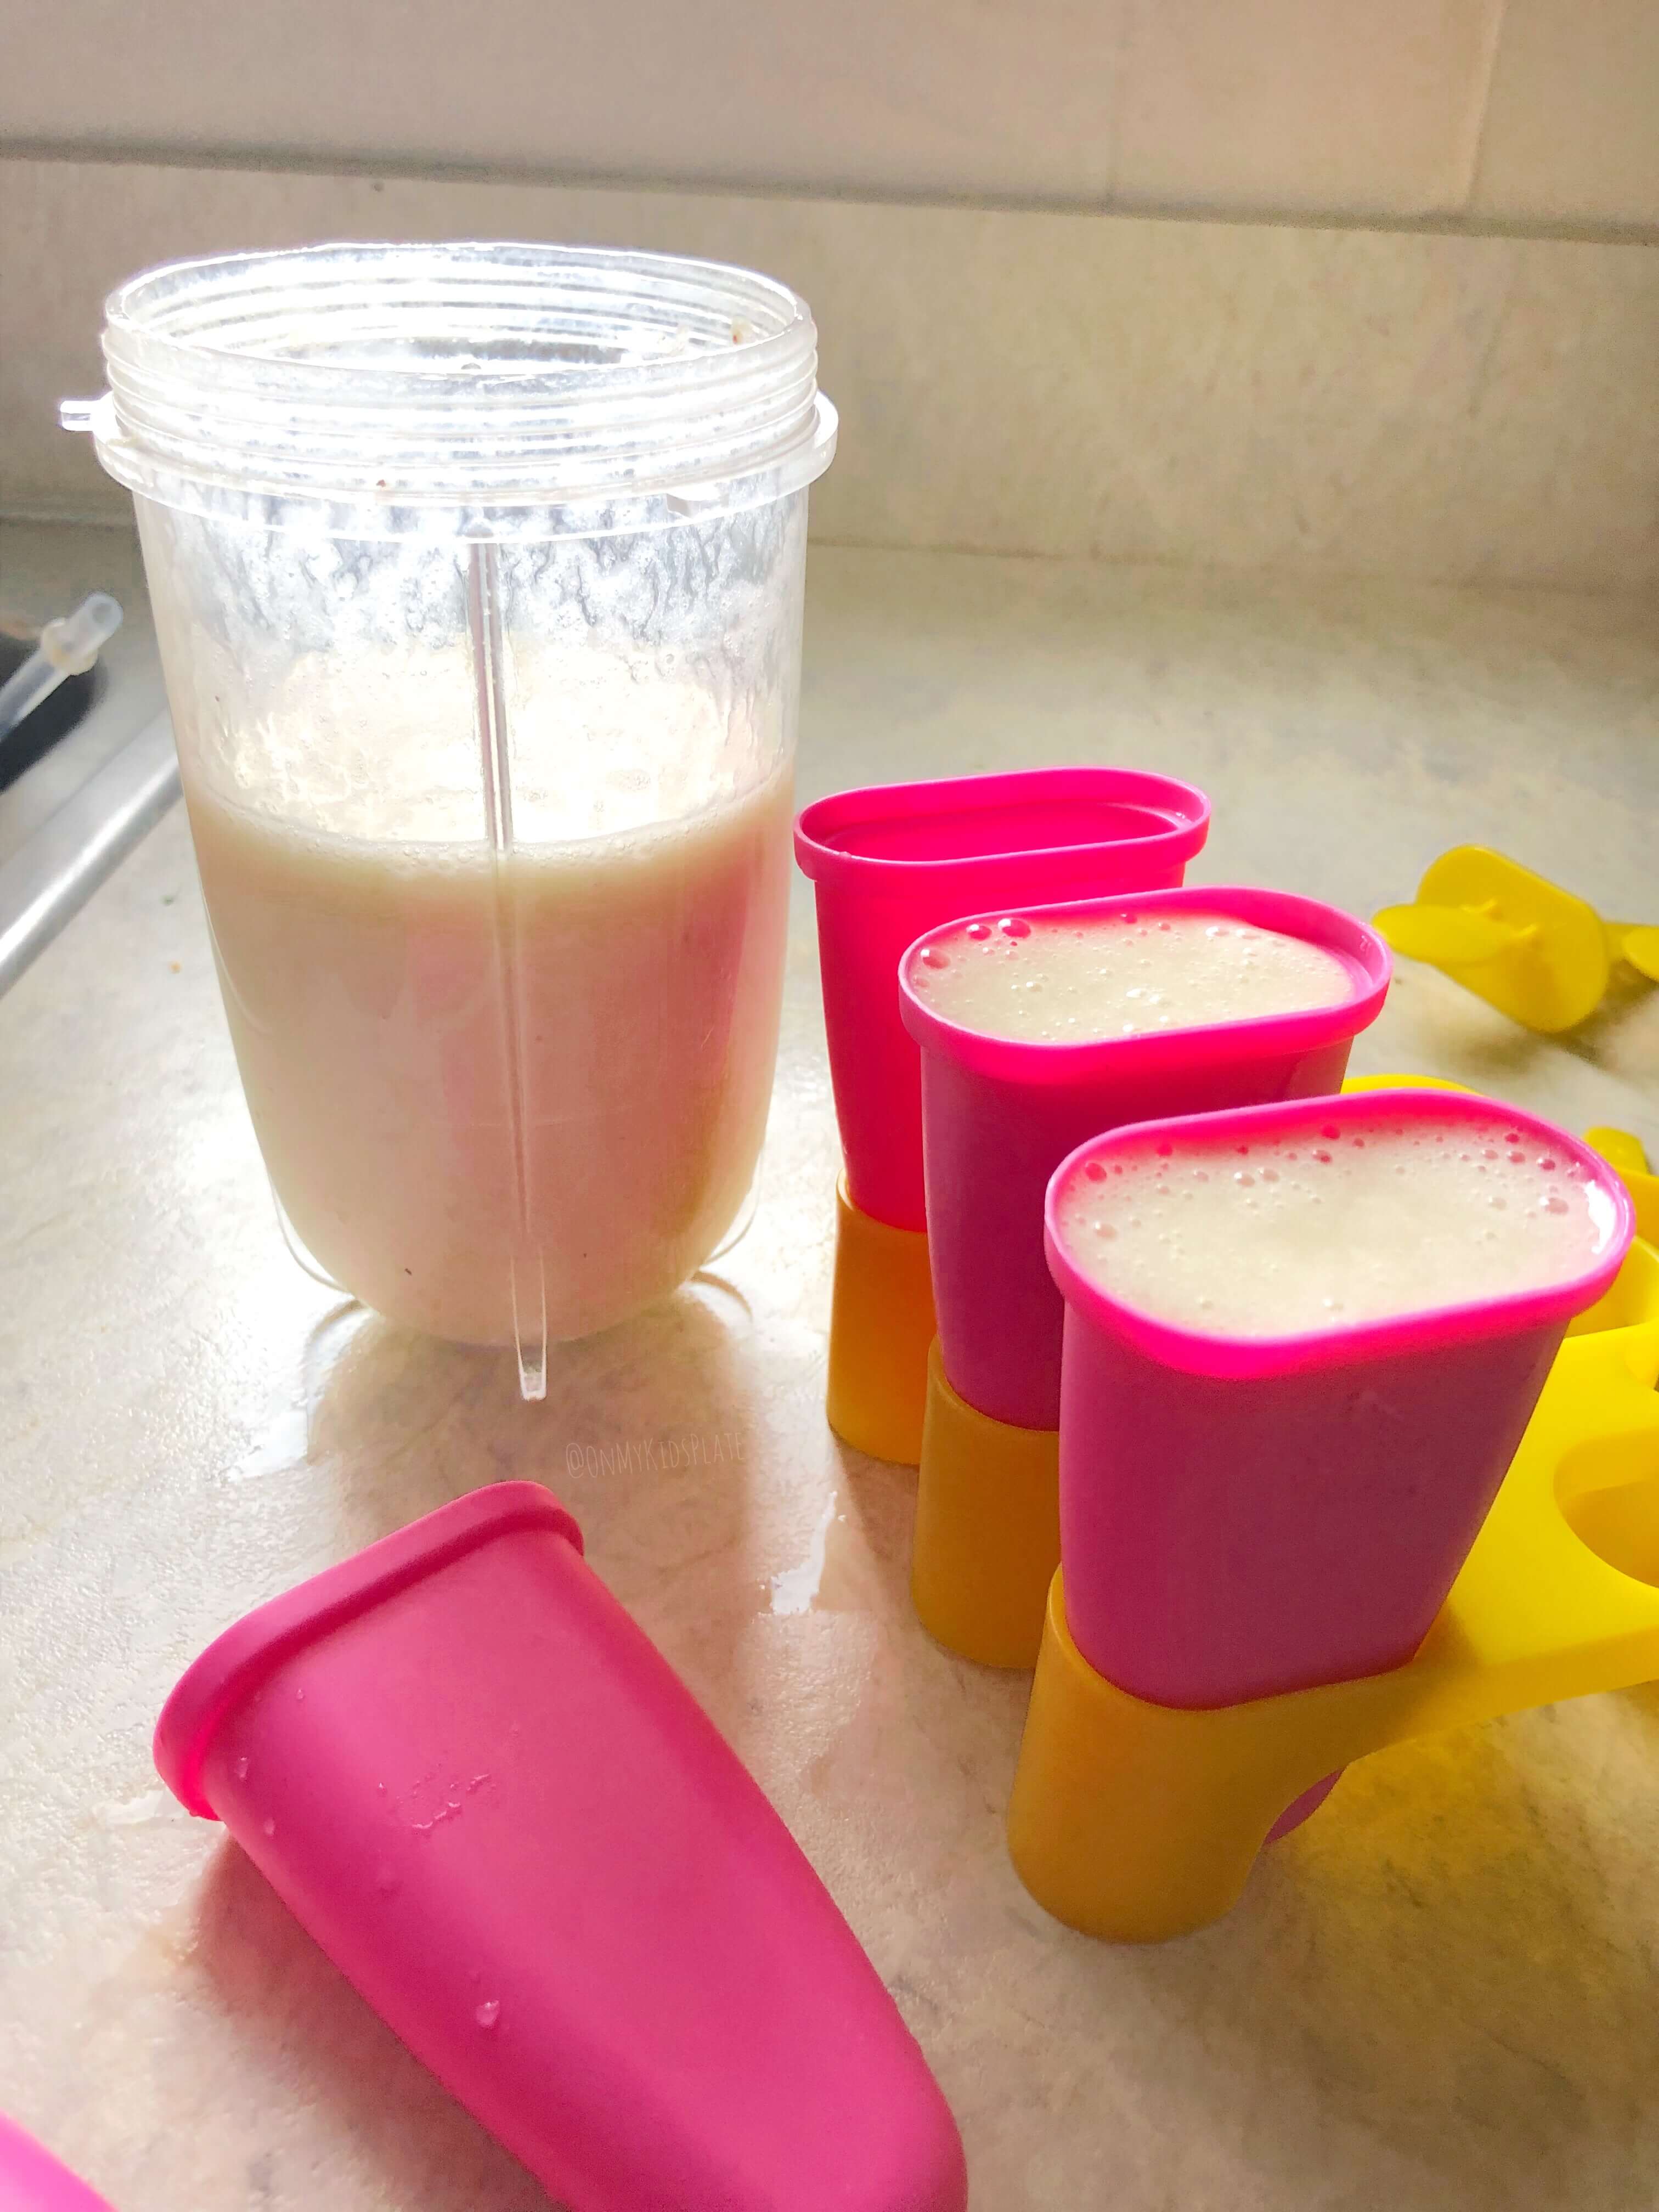 A cup full of blended popsicle mix and popsicles molds being filled